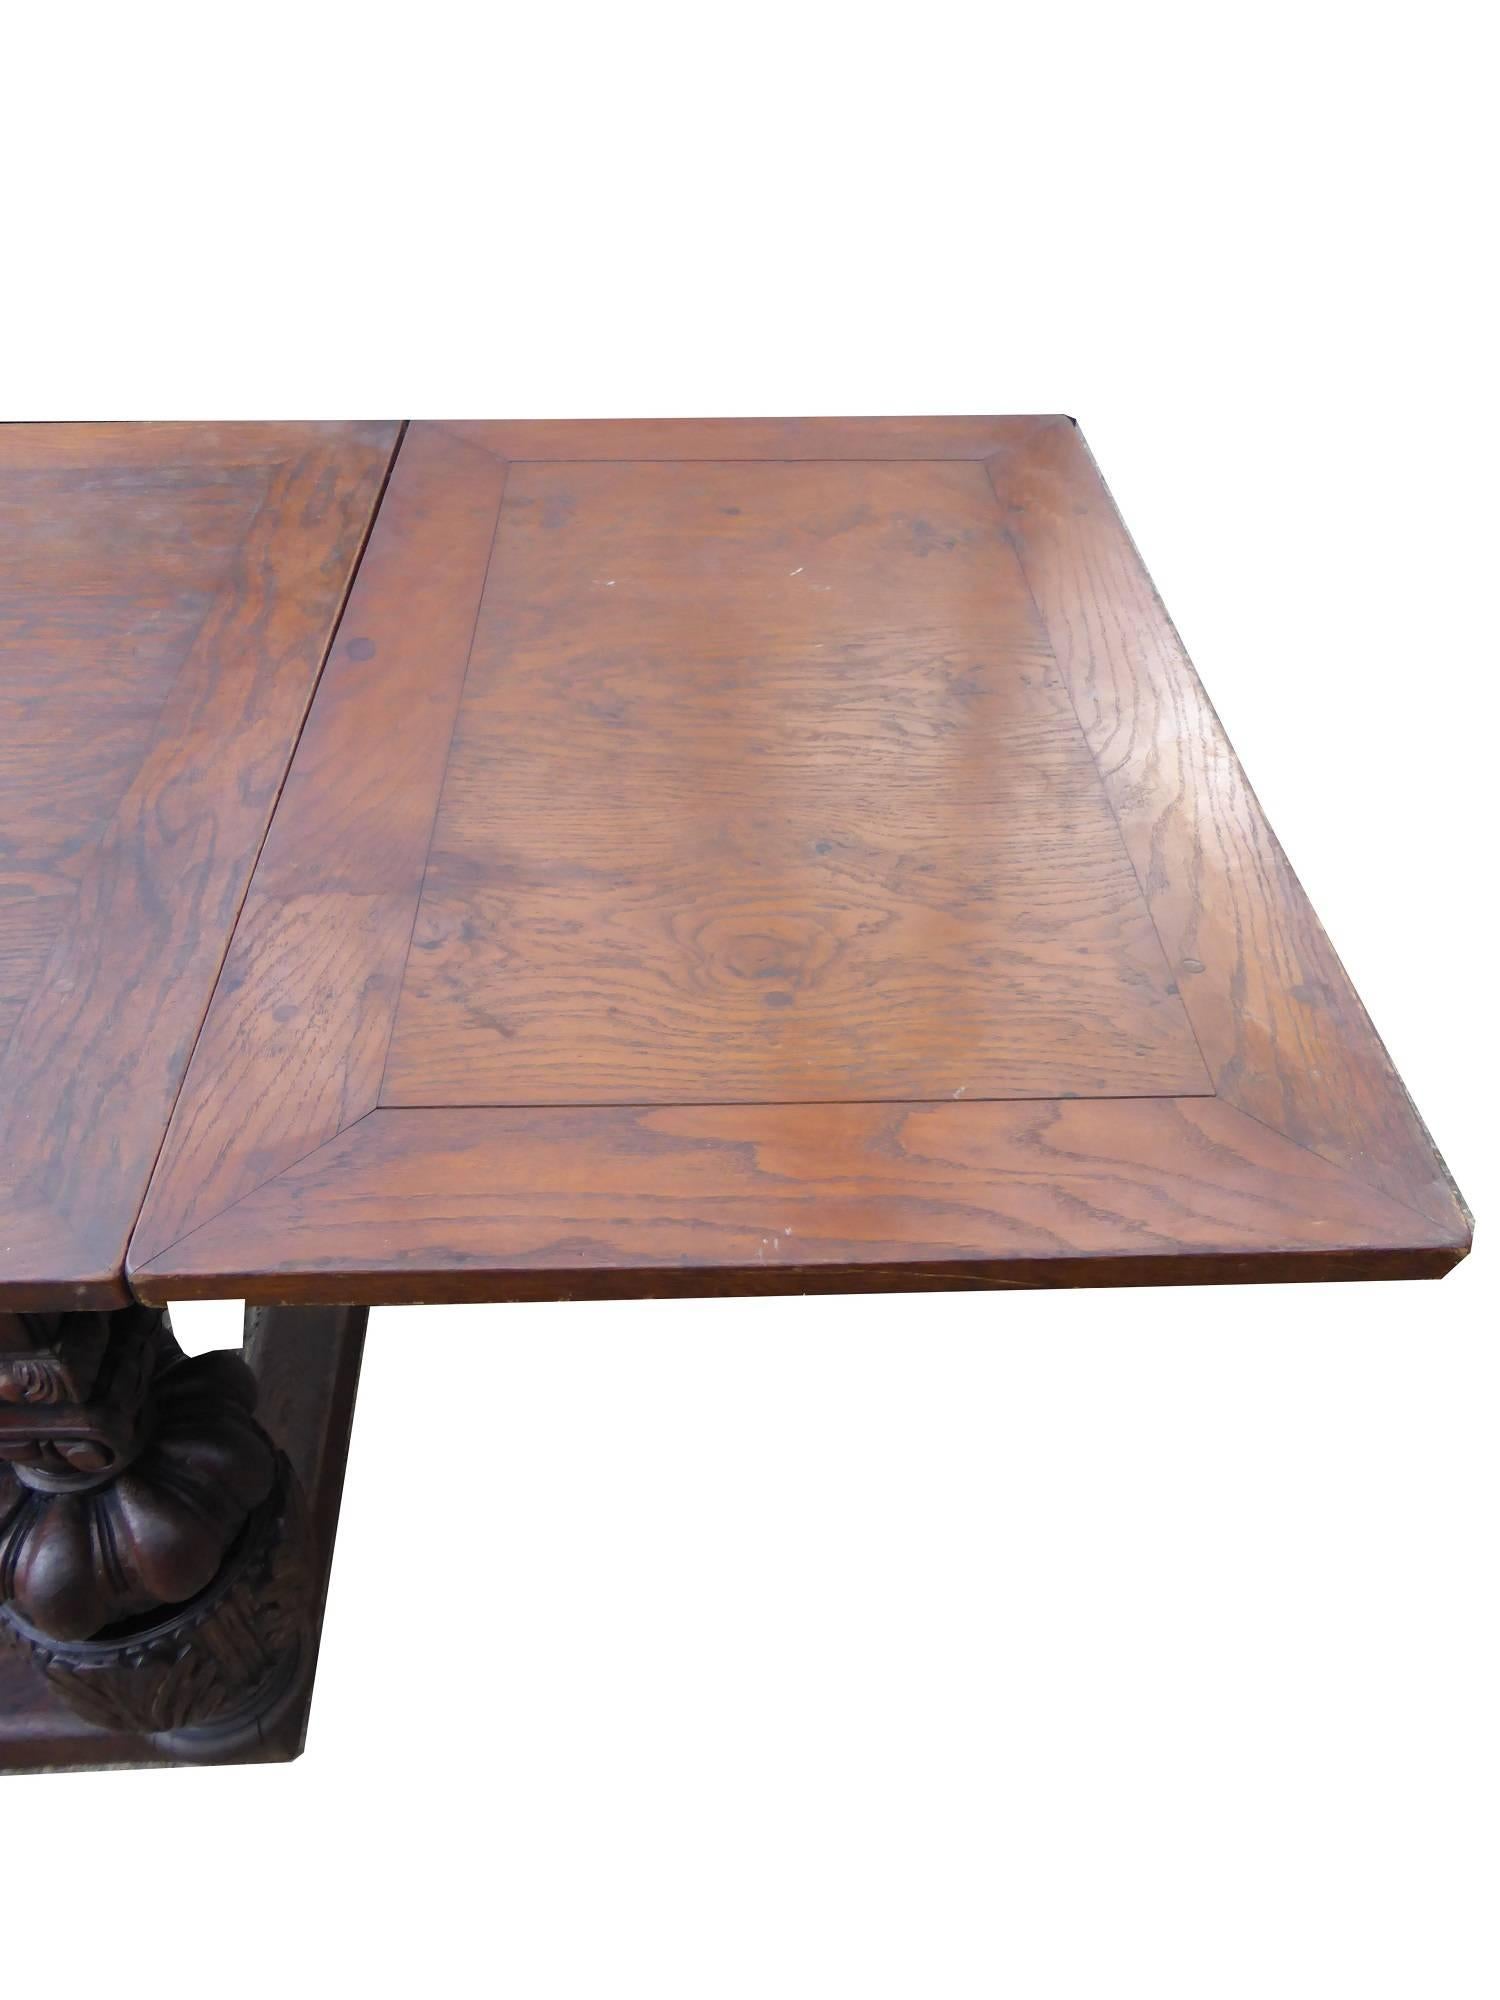 Large 19th Century Refectory Draw Leaf Table 2